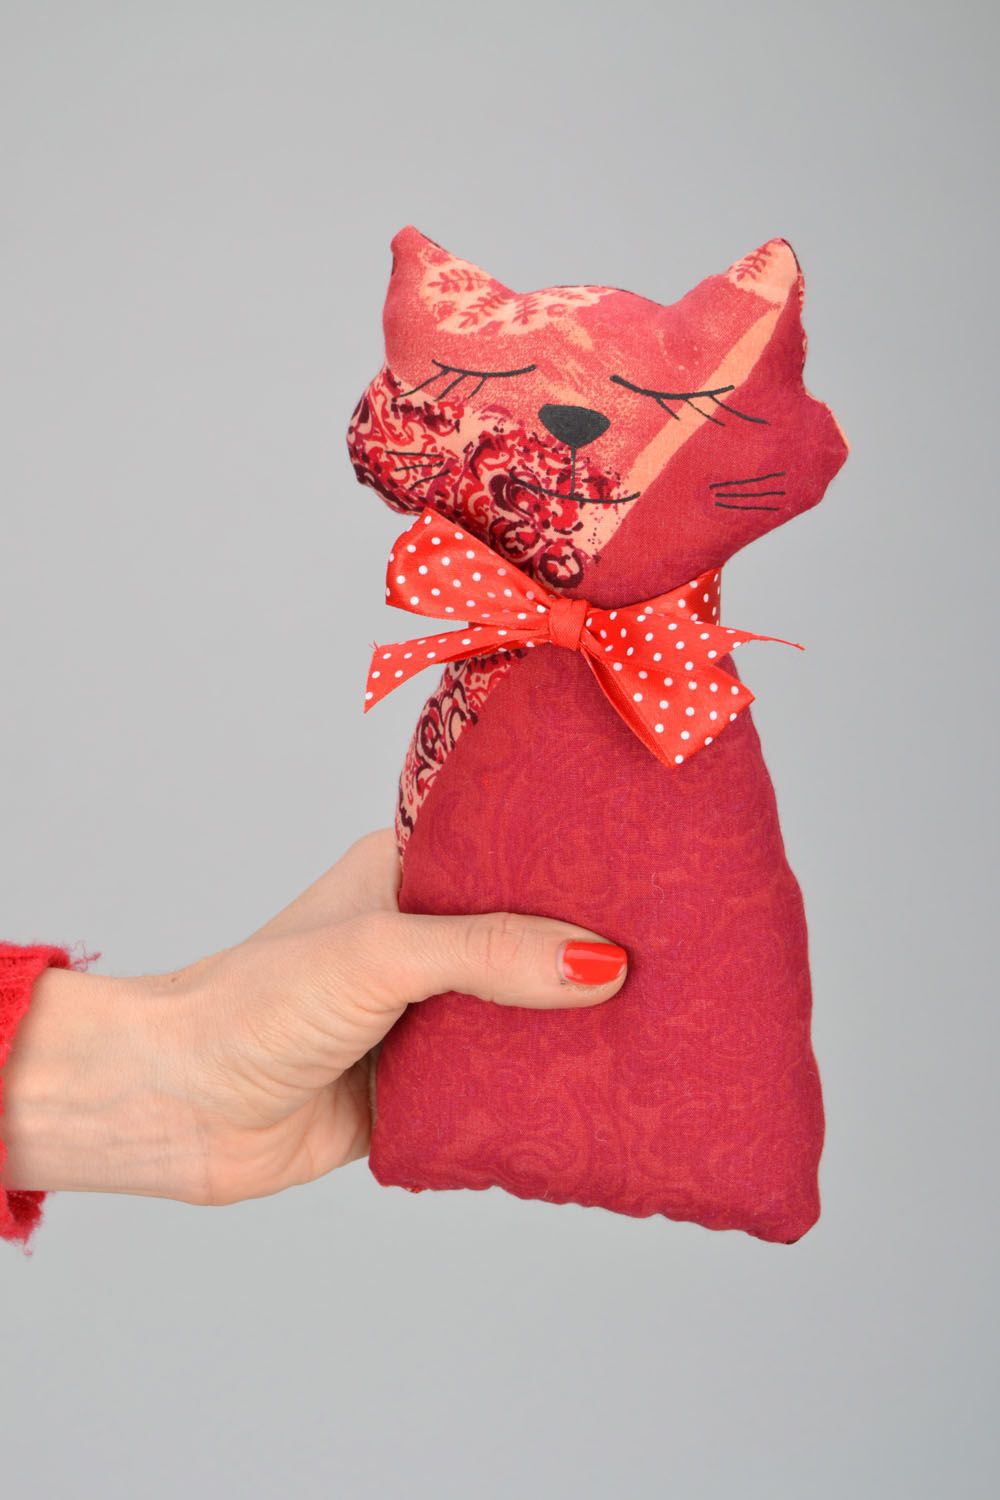 Handmade soft toy Cat with a Bow Tie photo 2